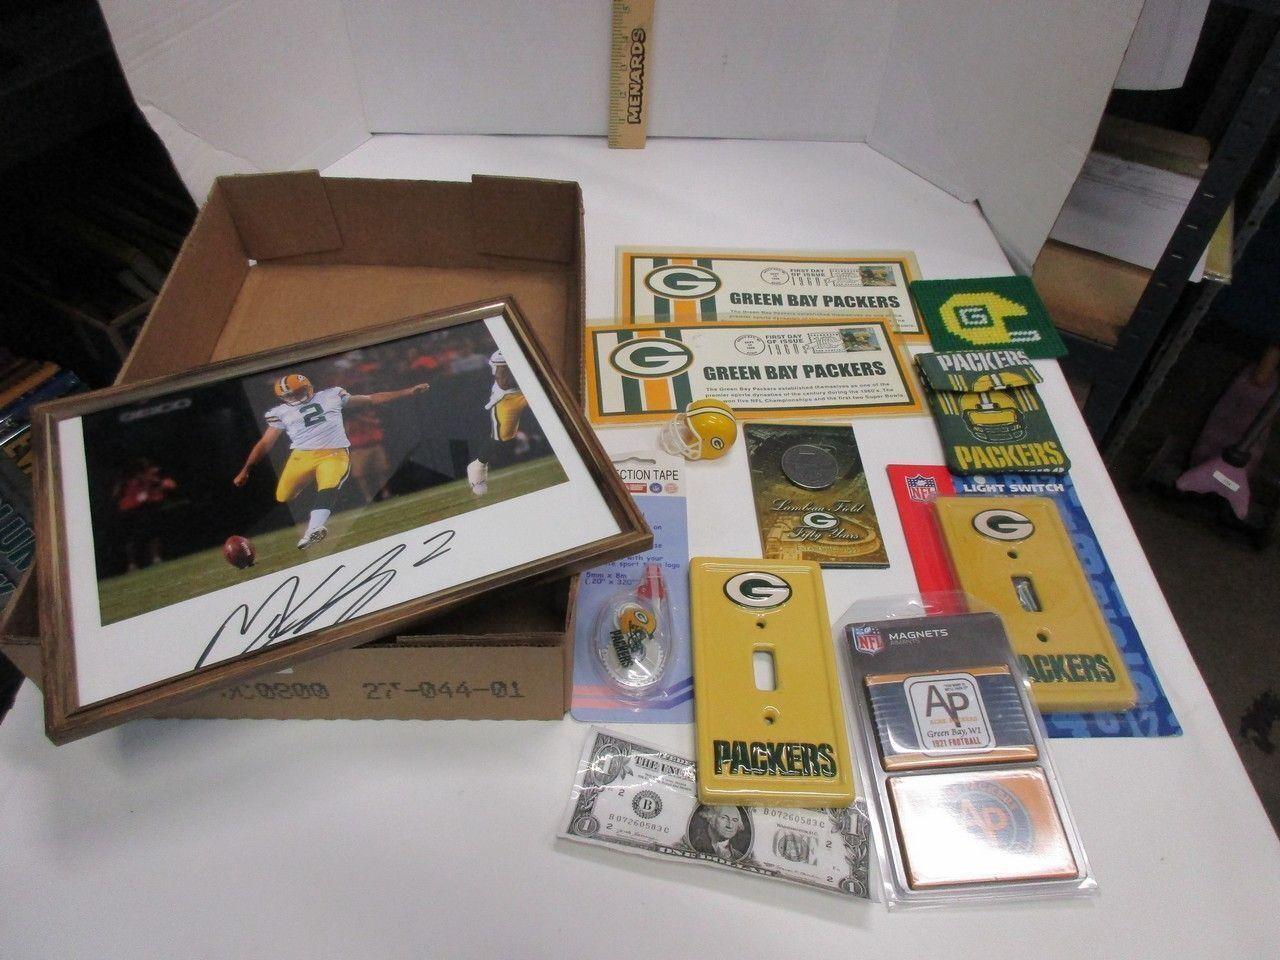 Green Bay Packers items, Some new